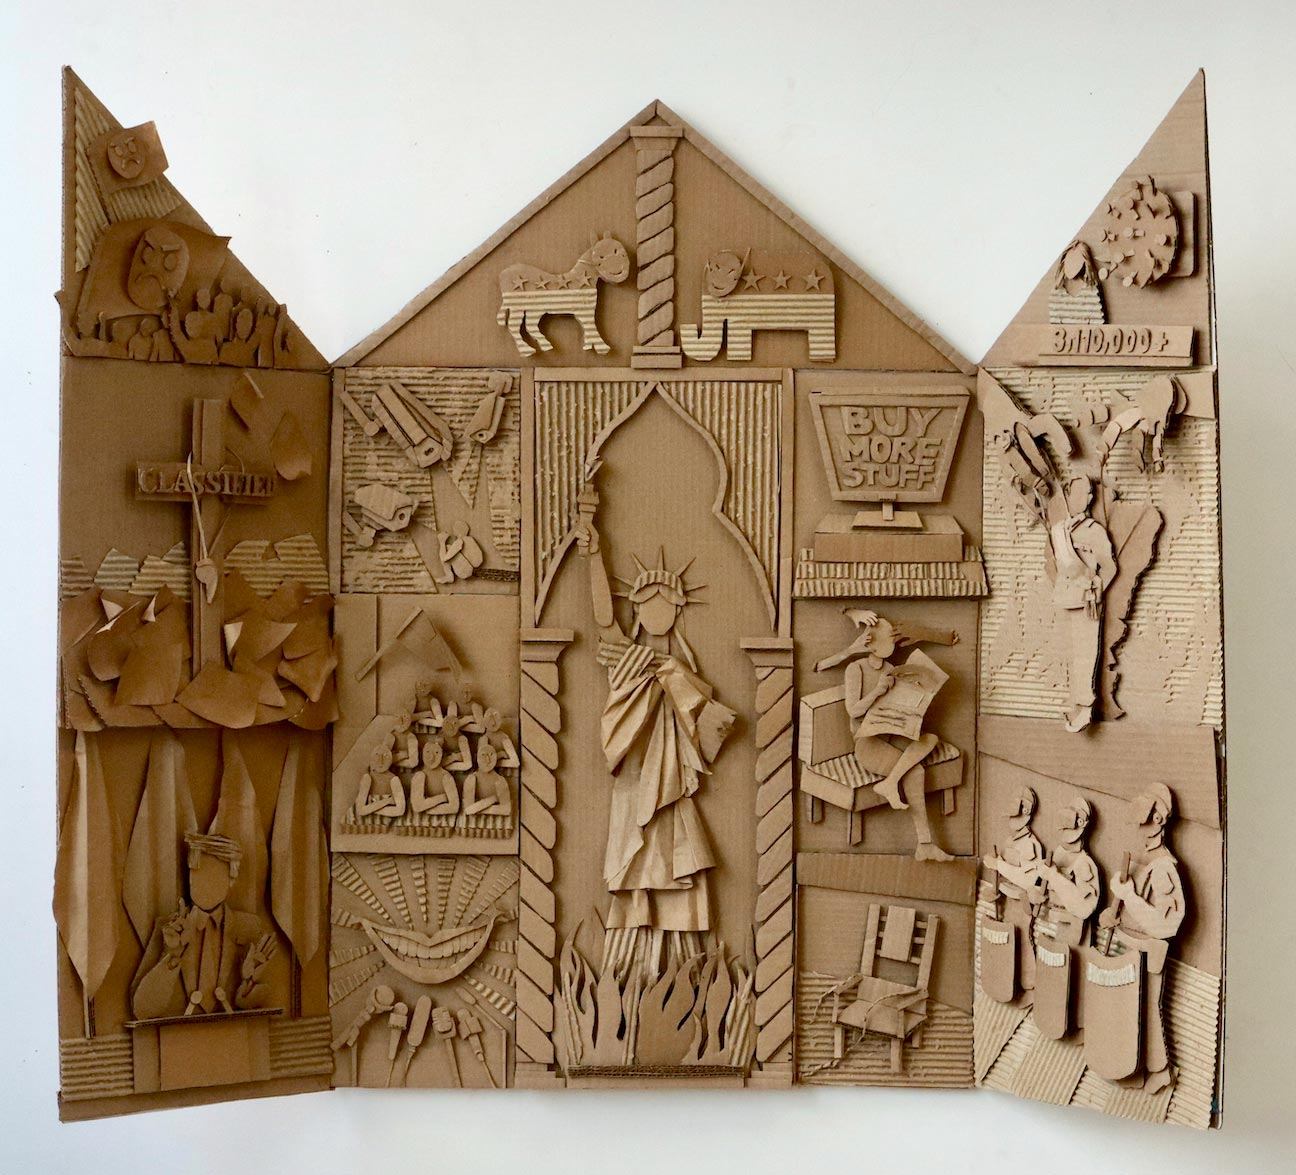 triptych nativity made of cardboard containing imagery from the contemporary American experience